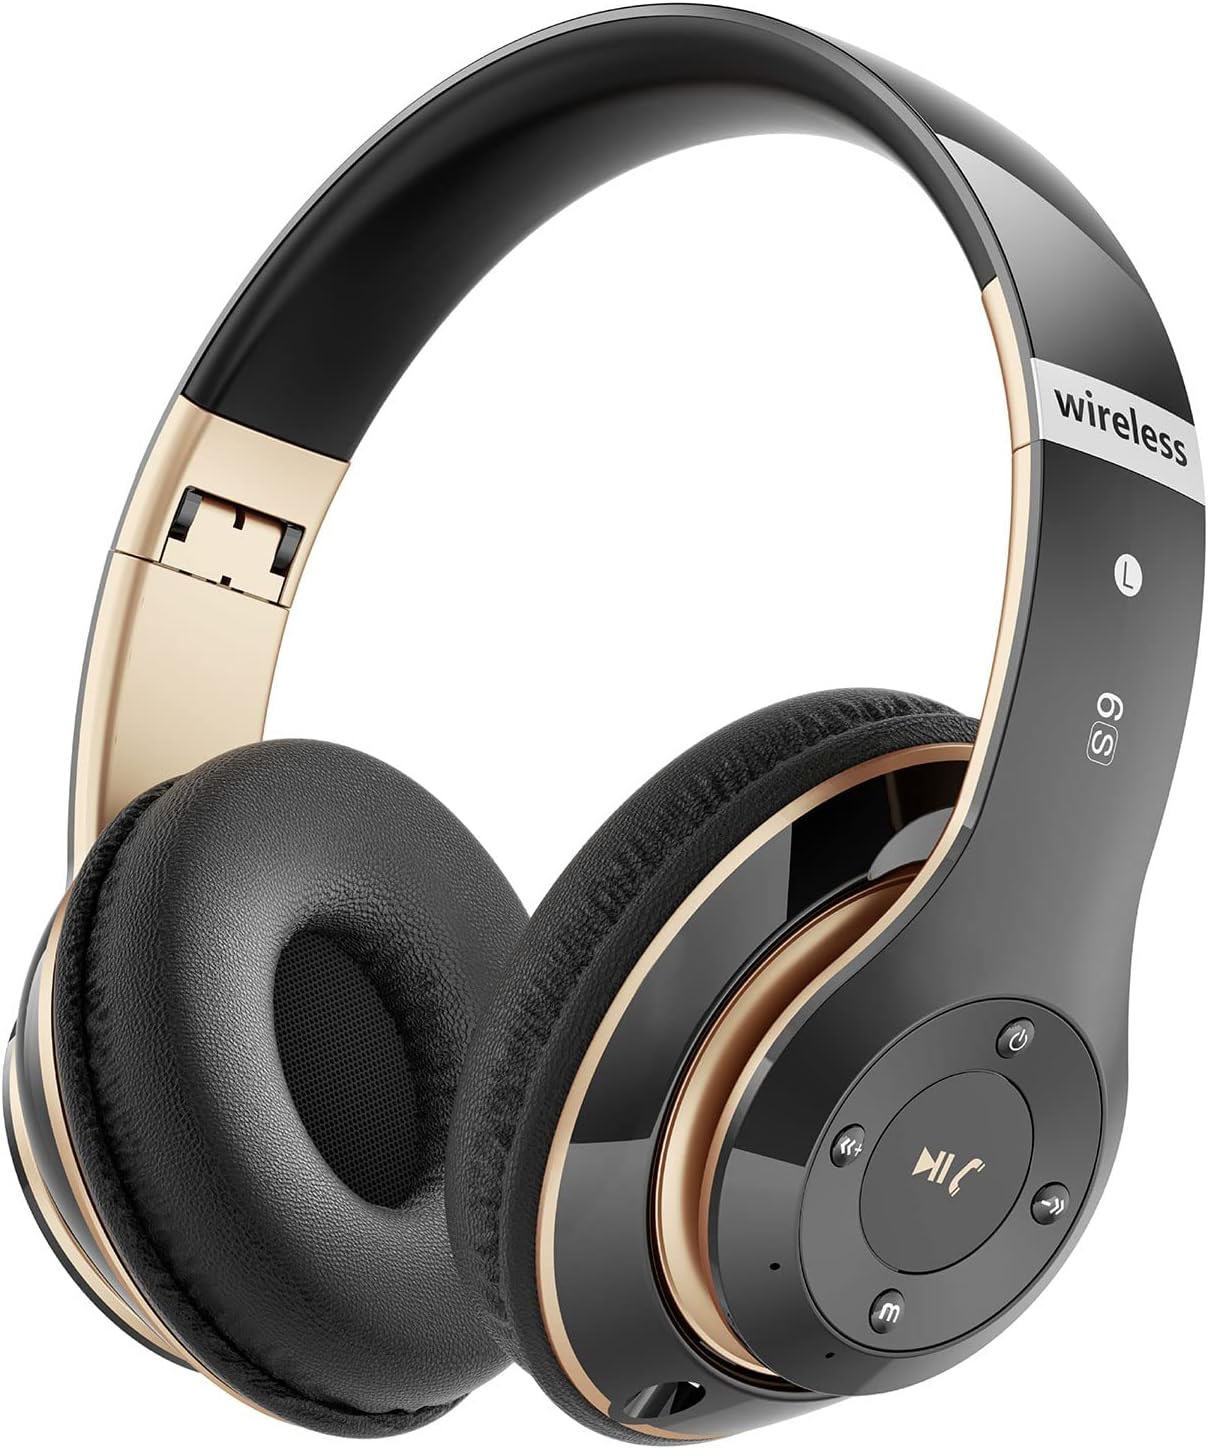 Bluetooth Headphones Over Ear, 6S Wireless Headphones Wired with 6 EQ Modes, 40 Hours Playtime Foldable HiFi Stereo Headset with Microphone, Soft Ear Pads, FM/TF for Cellphone/PC/Work (Black  Gold)                Wireless Technology: Bluetooth, FM